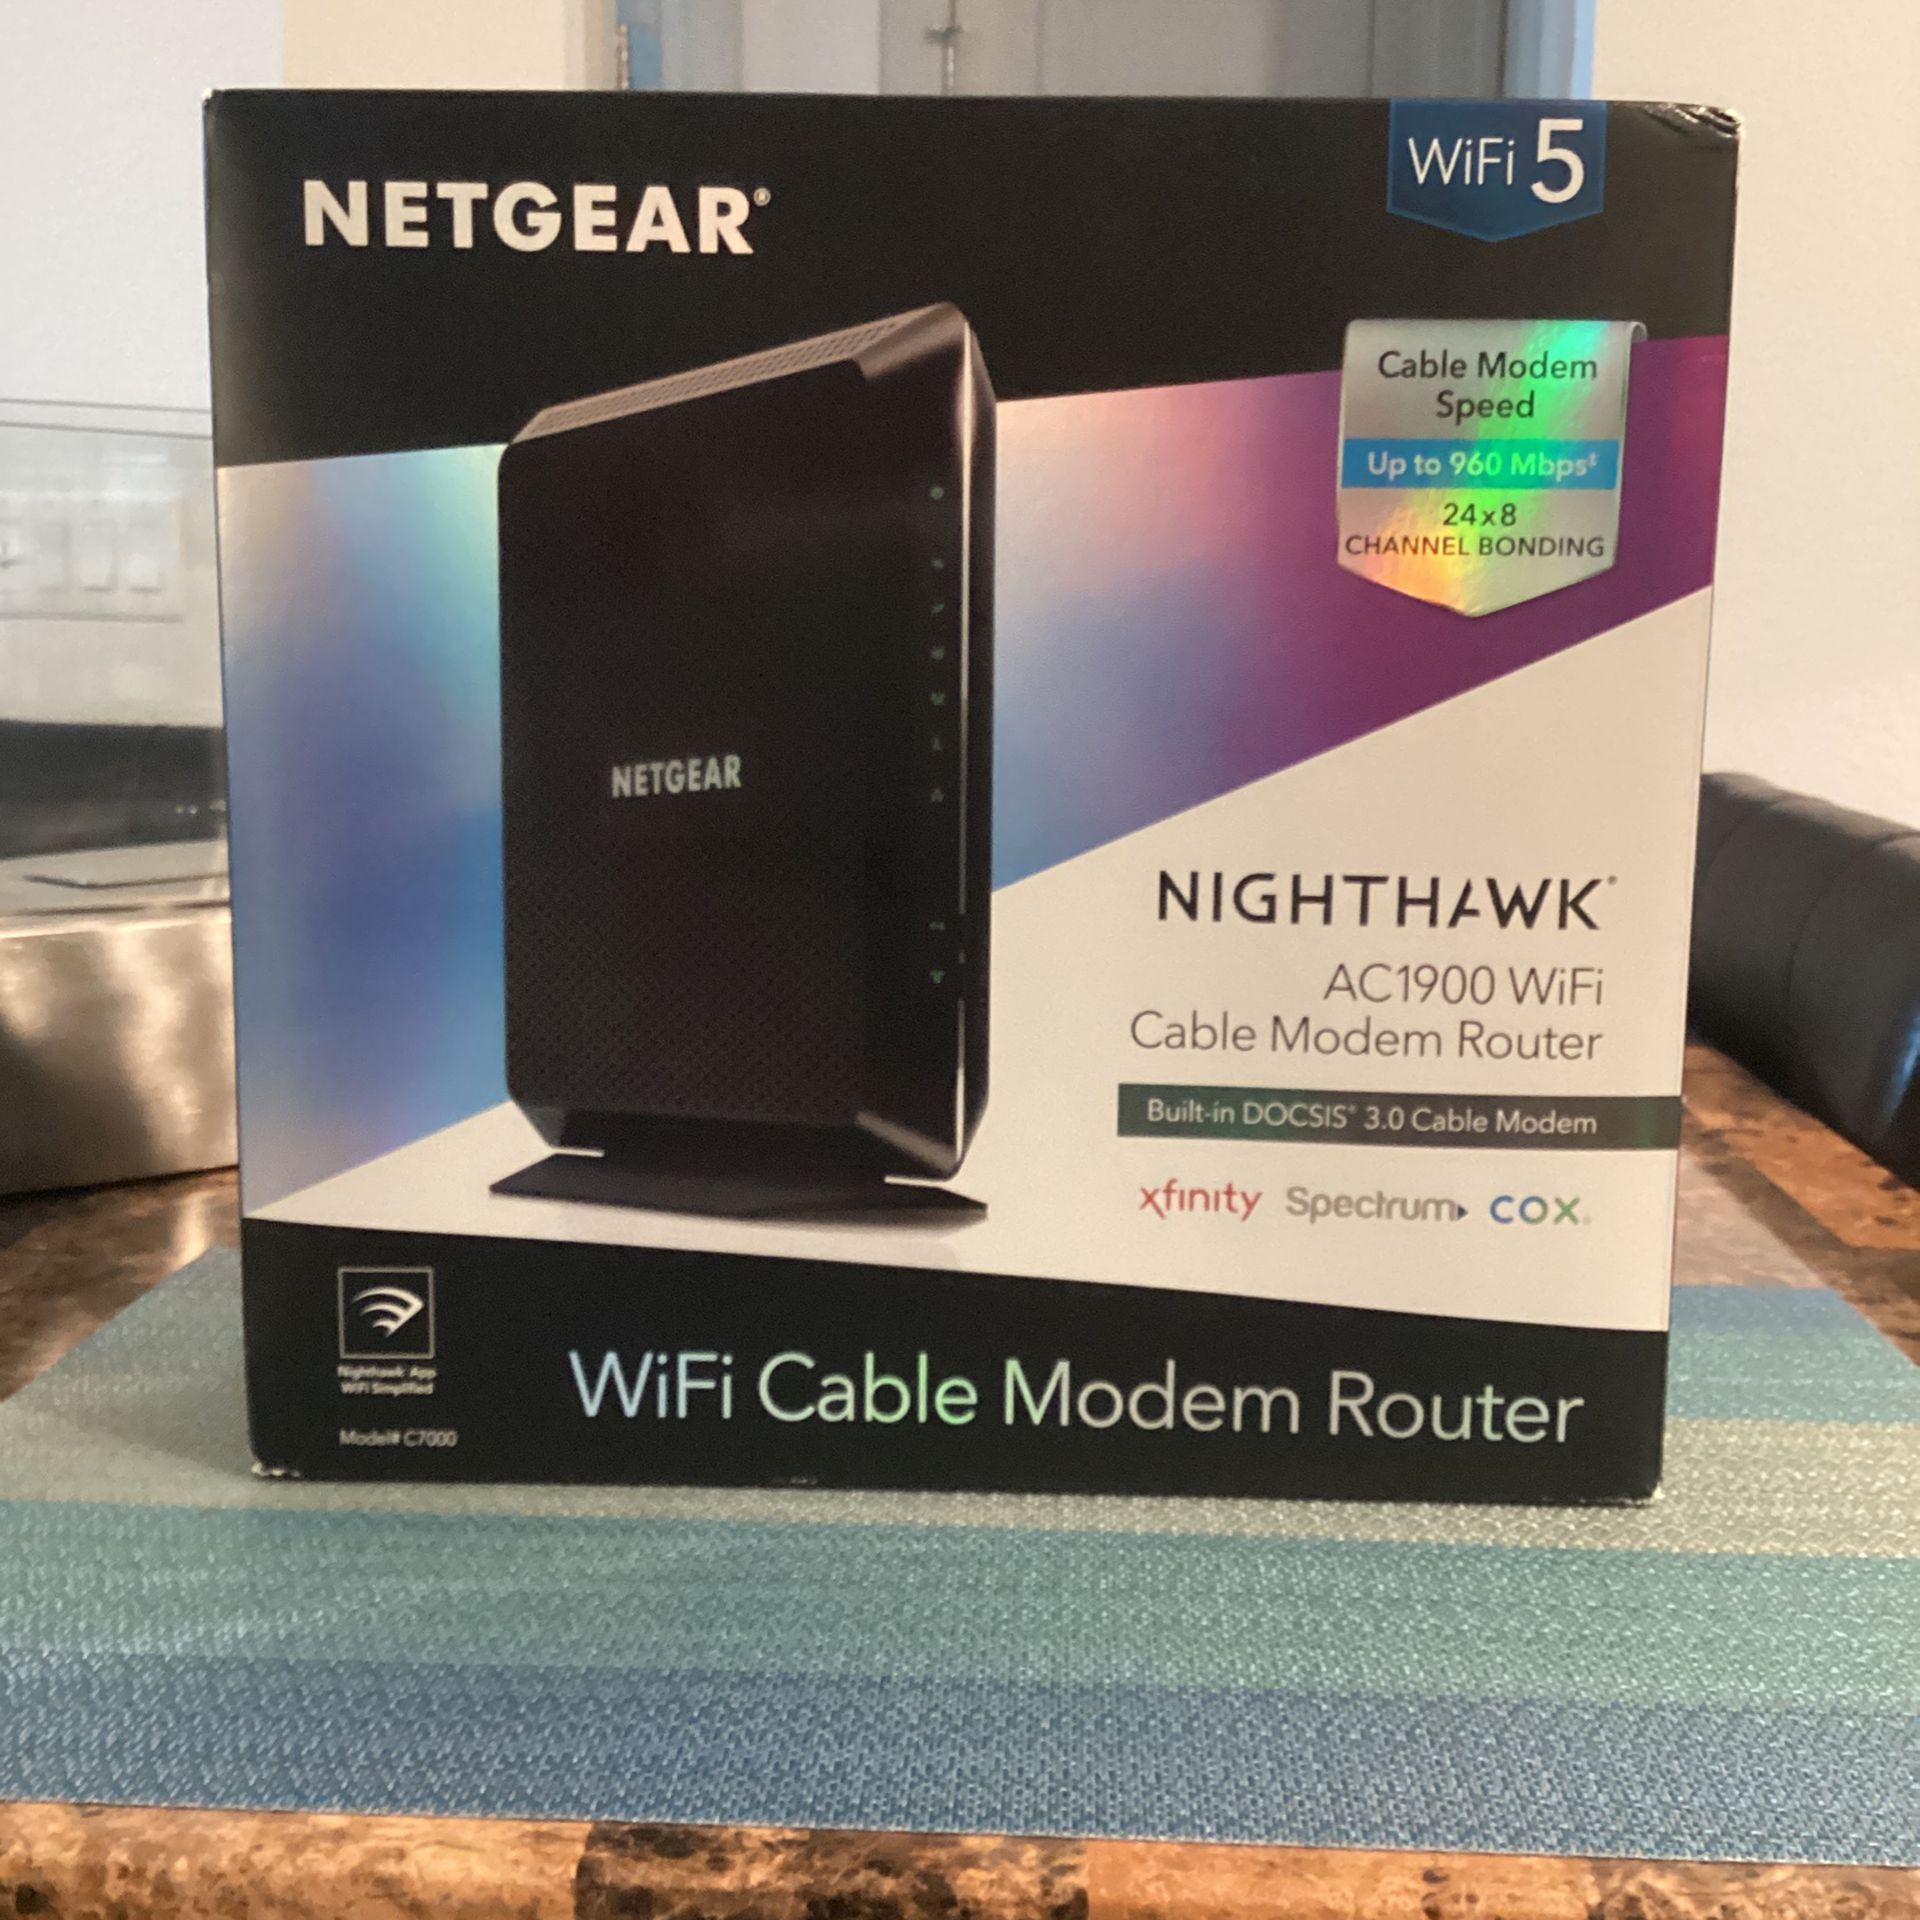 Nighthawk AC1900 WiFi and Cable Modem